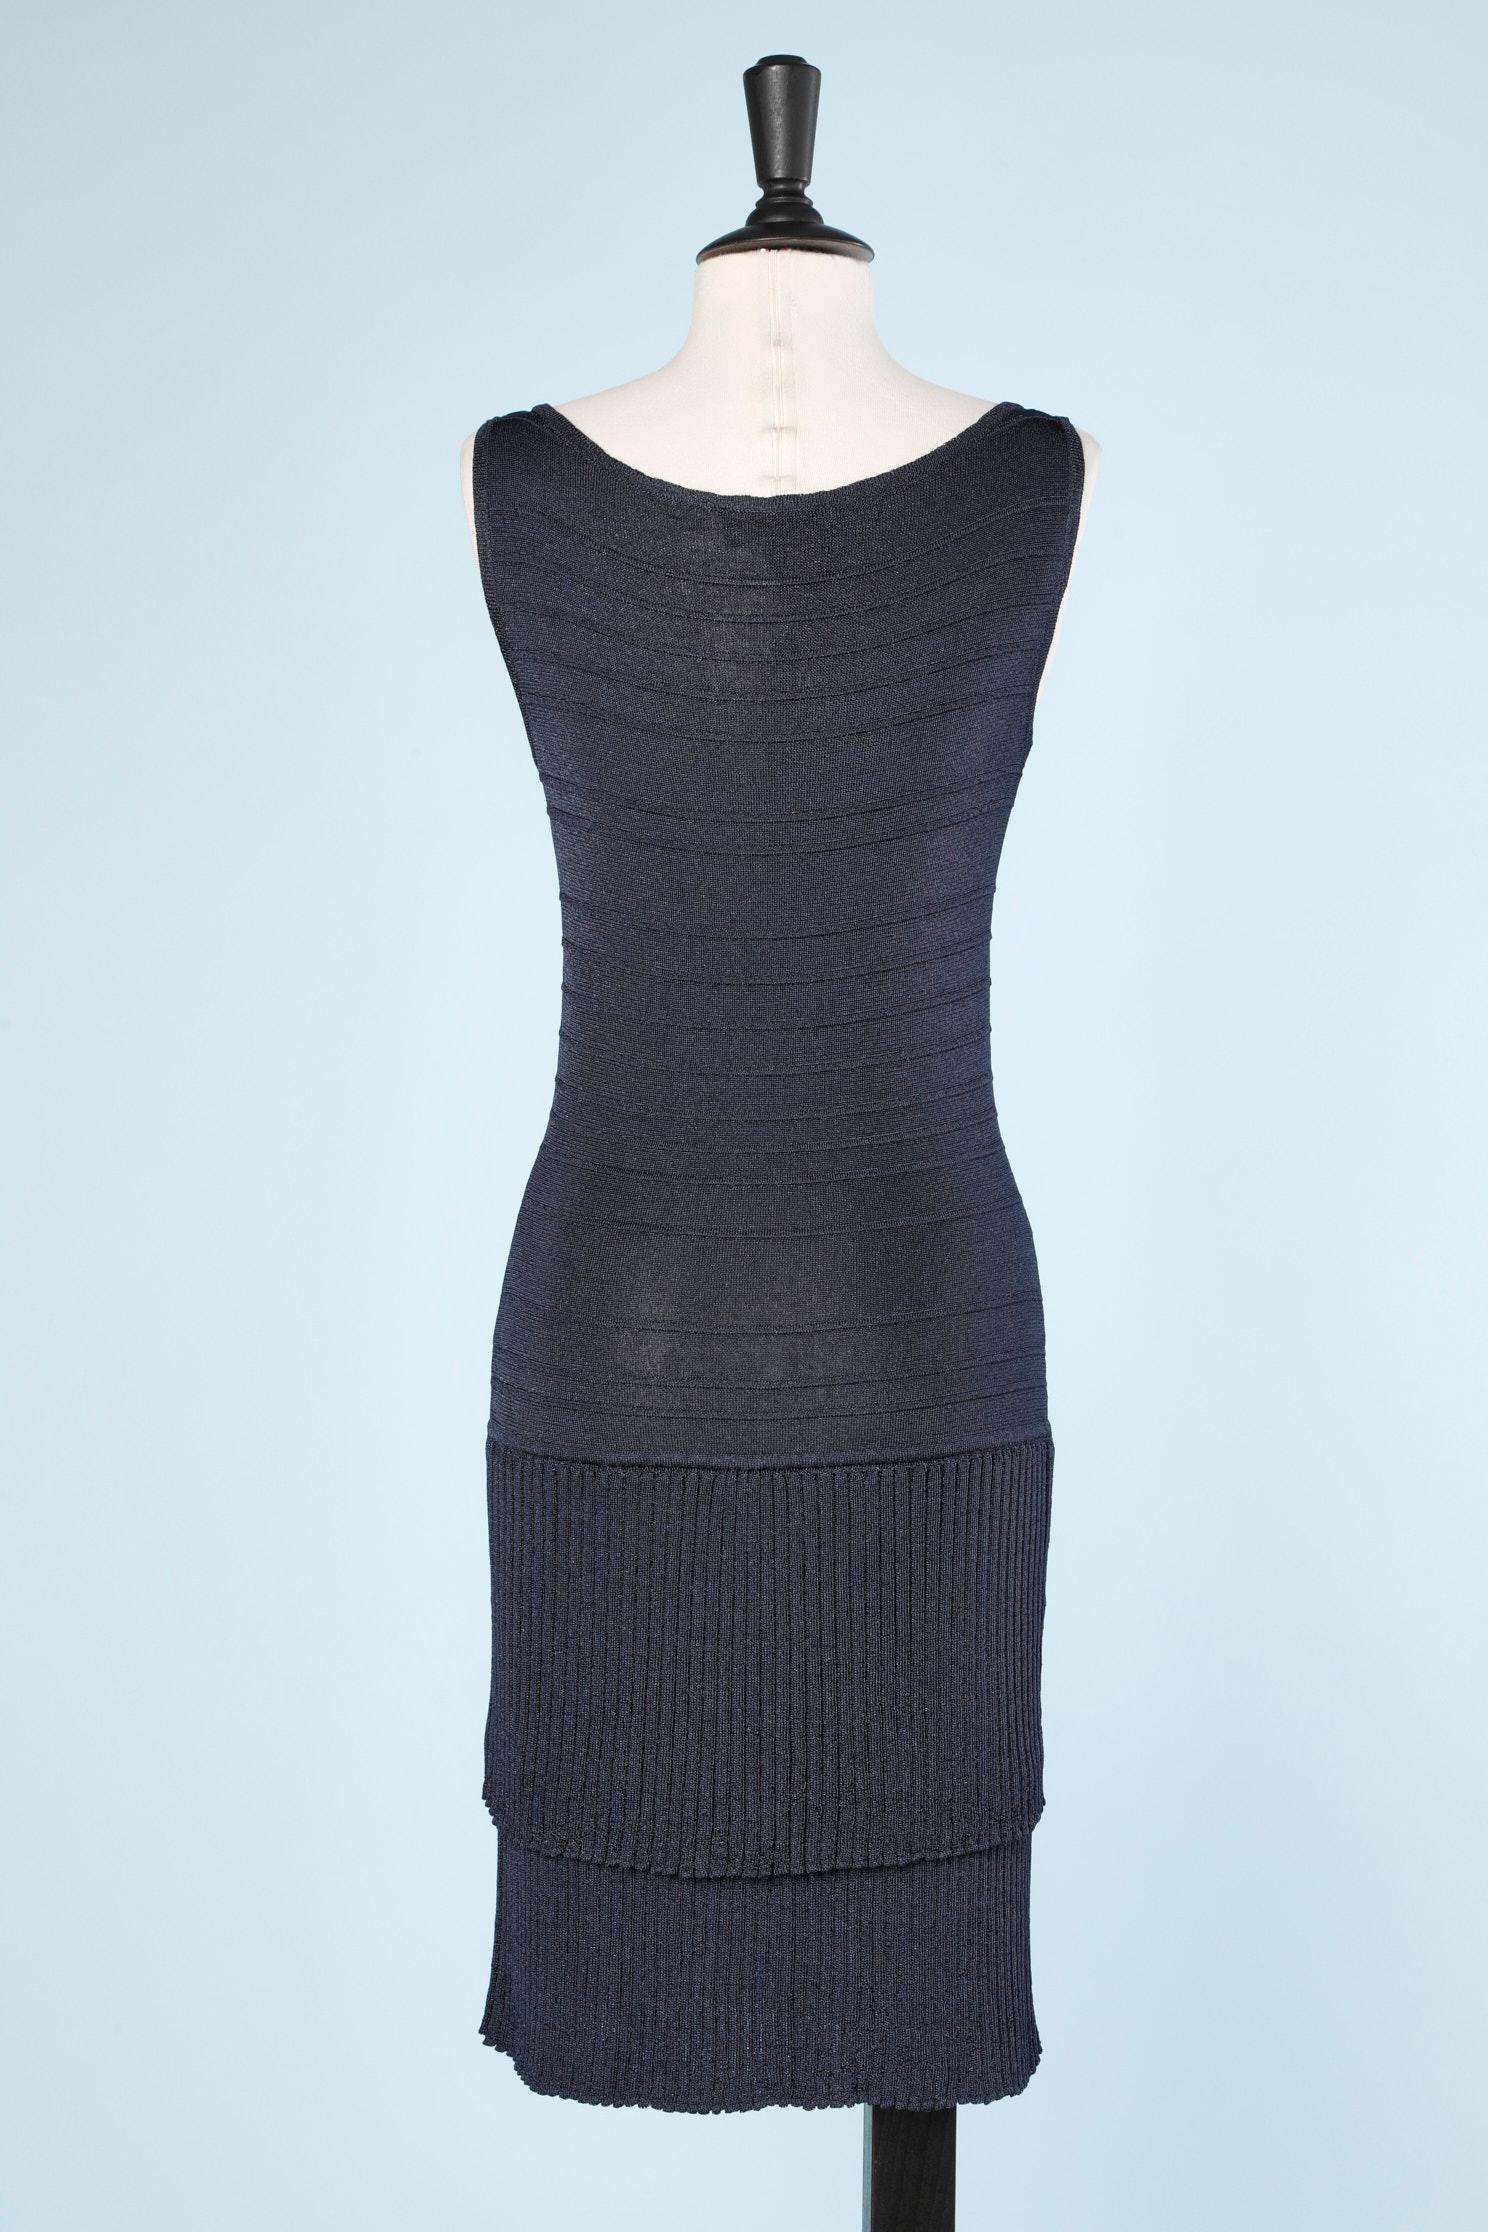 Women's Dress and Boléro in navy blue viscose knit Luisa Spagnoli  For Sale